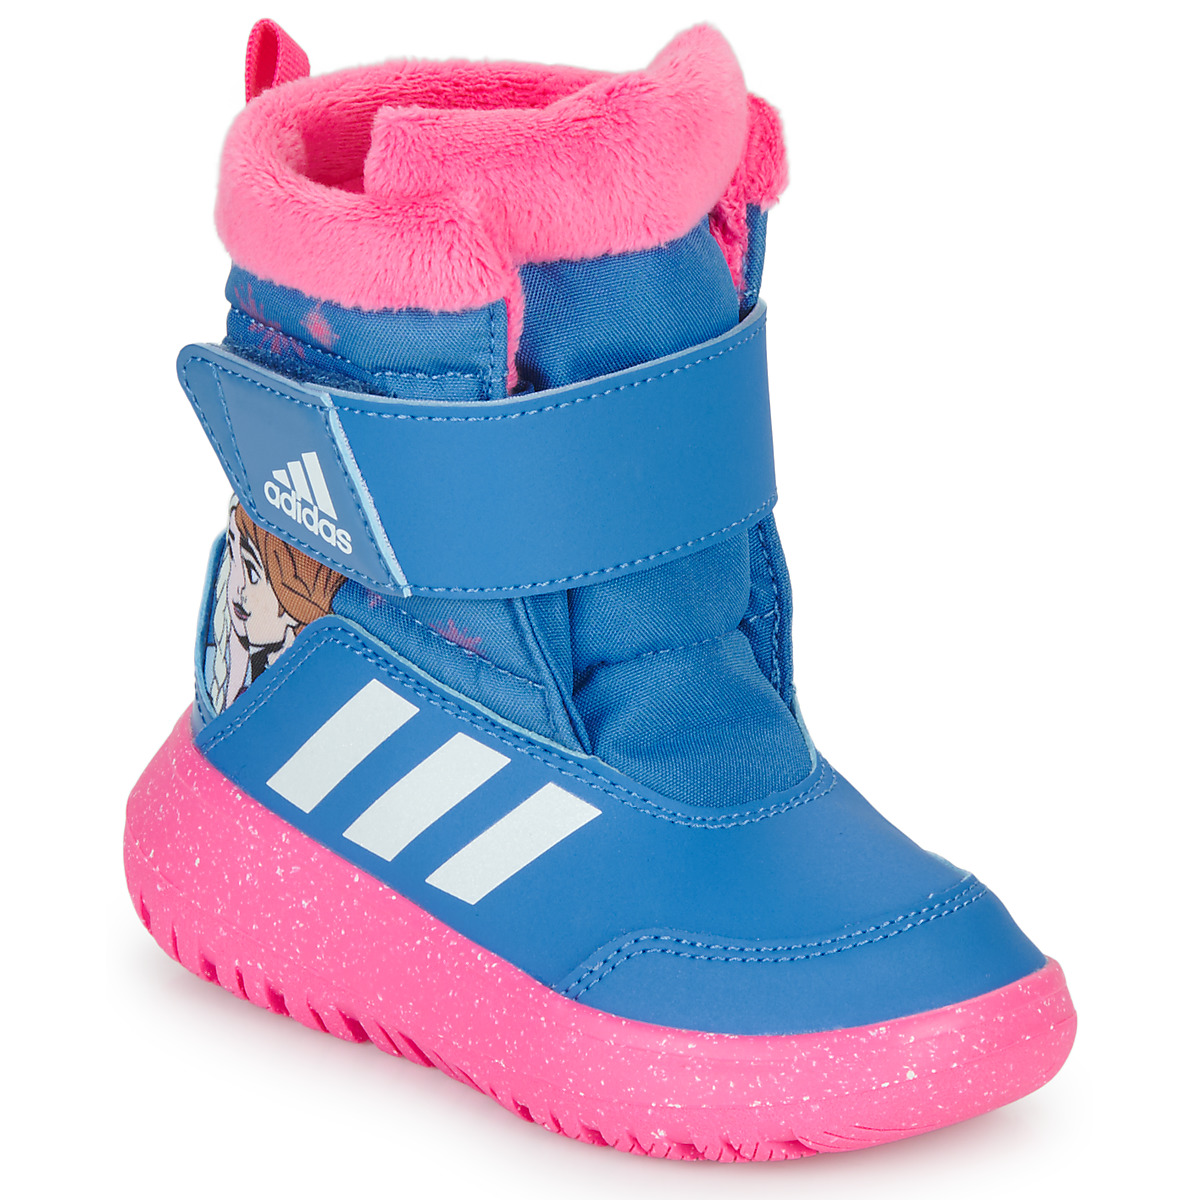 adidas Performance WINTERPLAY Frozen / Spartoo | ! delivery - - Pink I Free Shoes boots Blue NET Child Snow